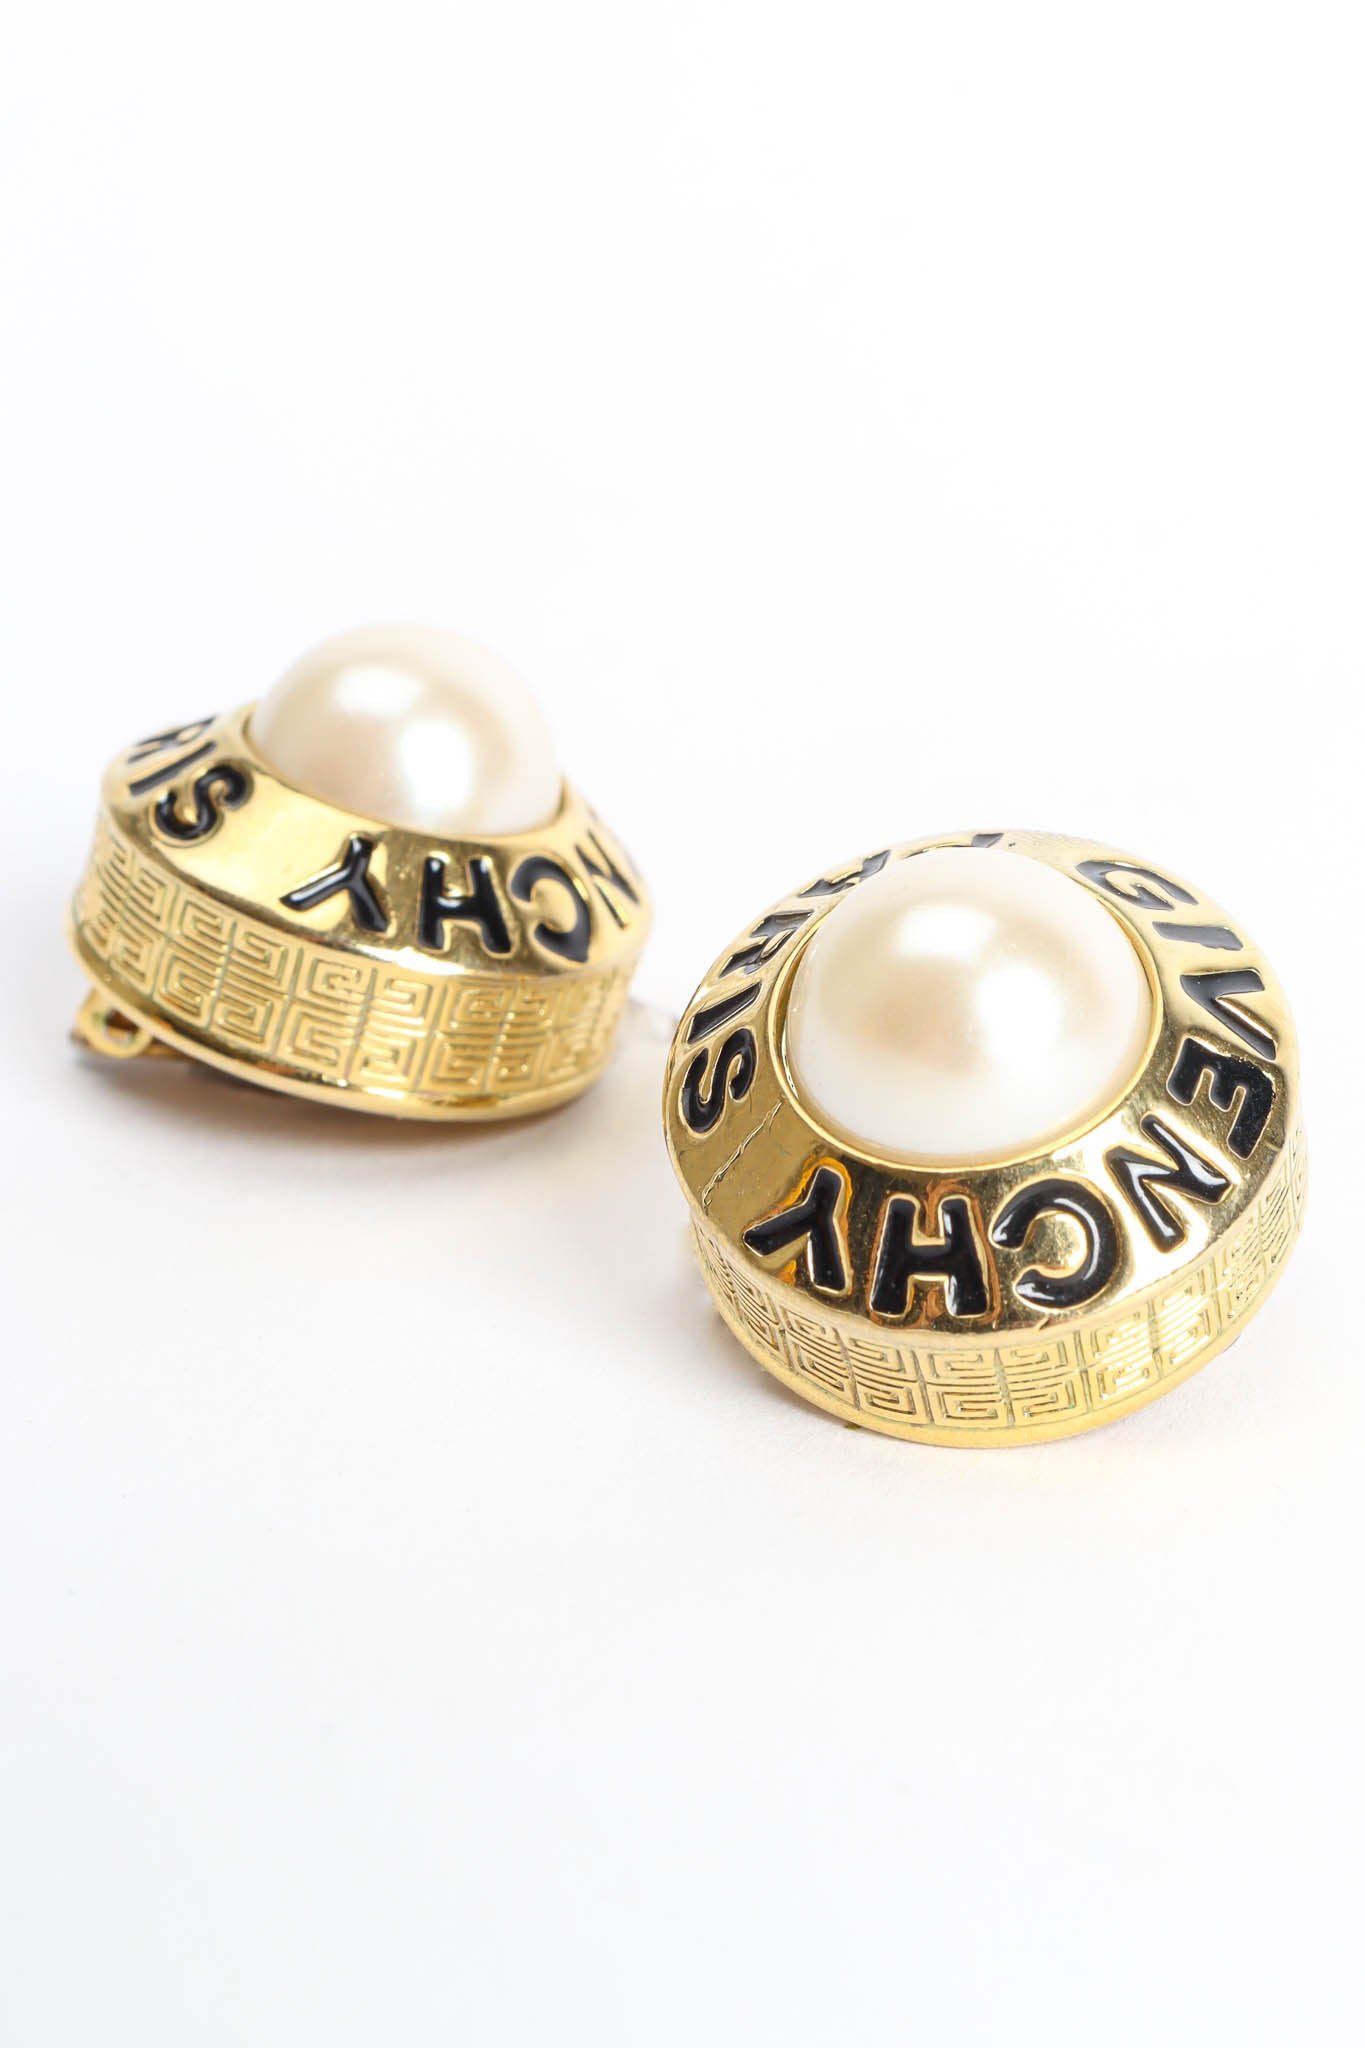 Vintage Givenchy Pearl Button Earrings greek key detail @ Recess Los Angeles